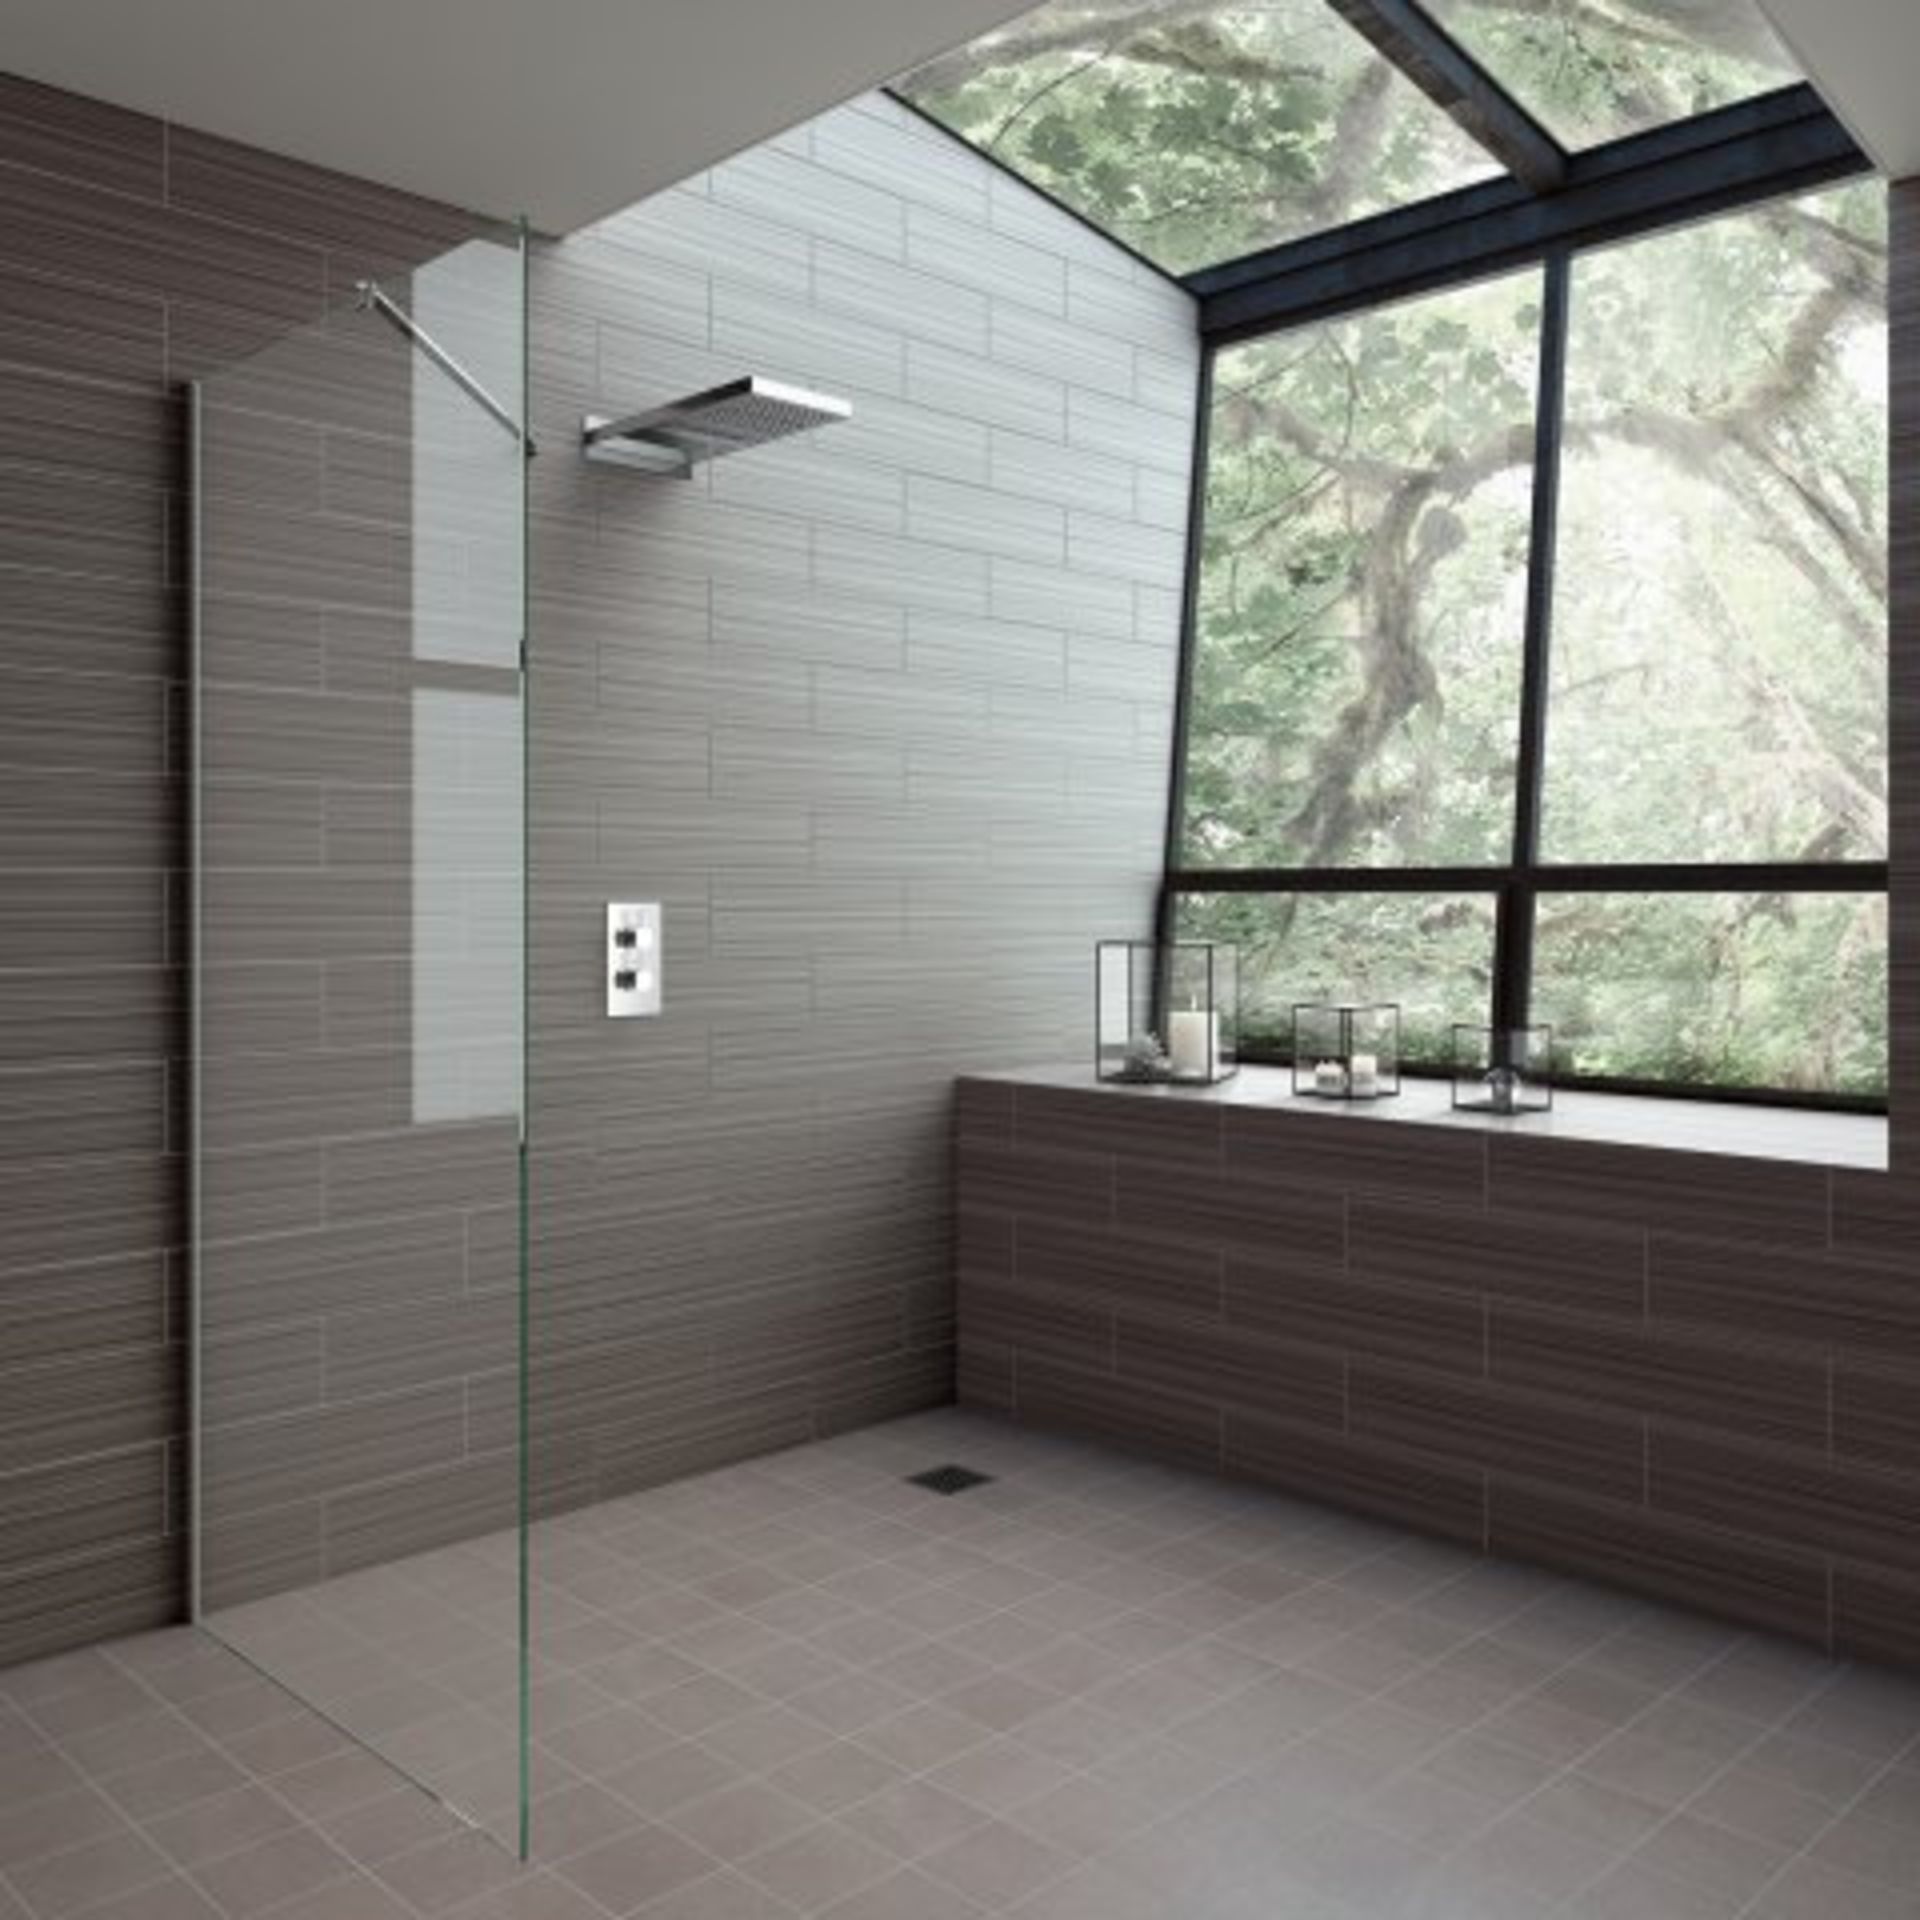 (I49) Stainless Steel 200x500mm Waterfall Shower Head RRP £374.99 "What An Experience": Enjoy - Image 5 of 5